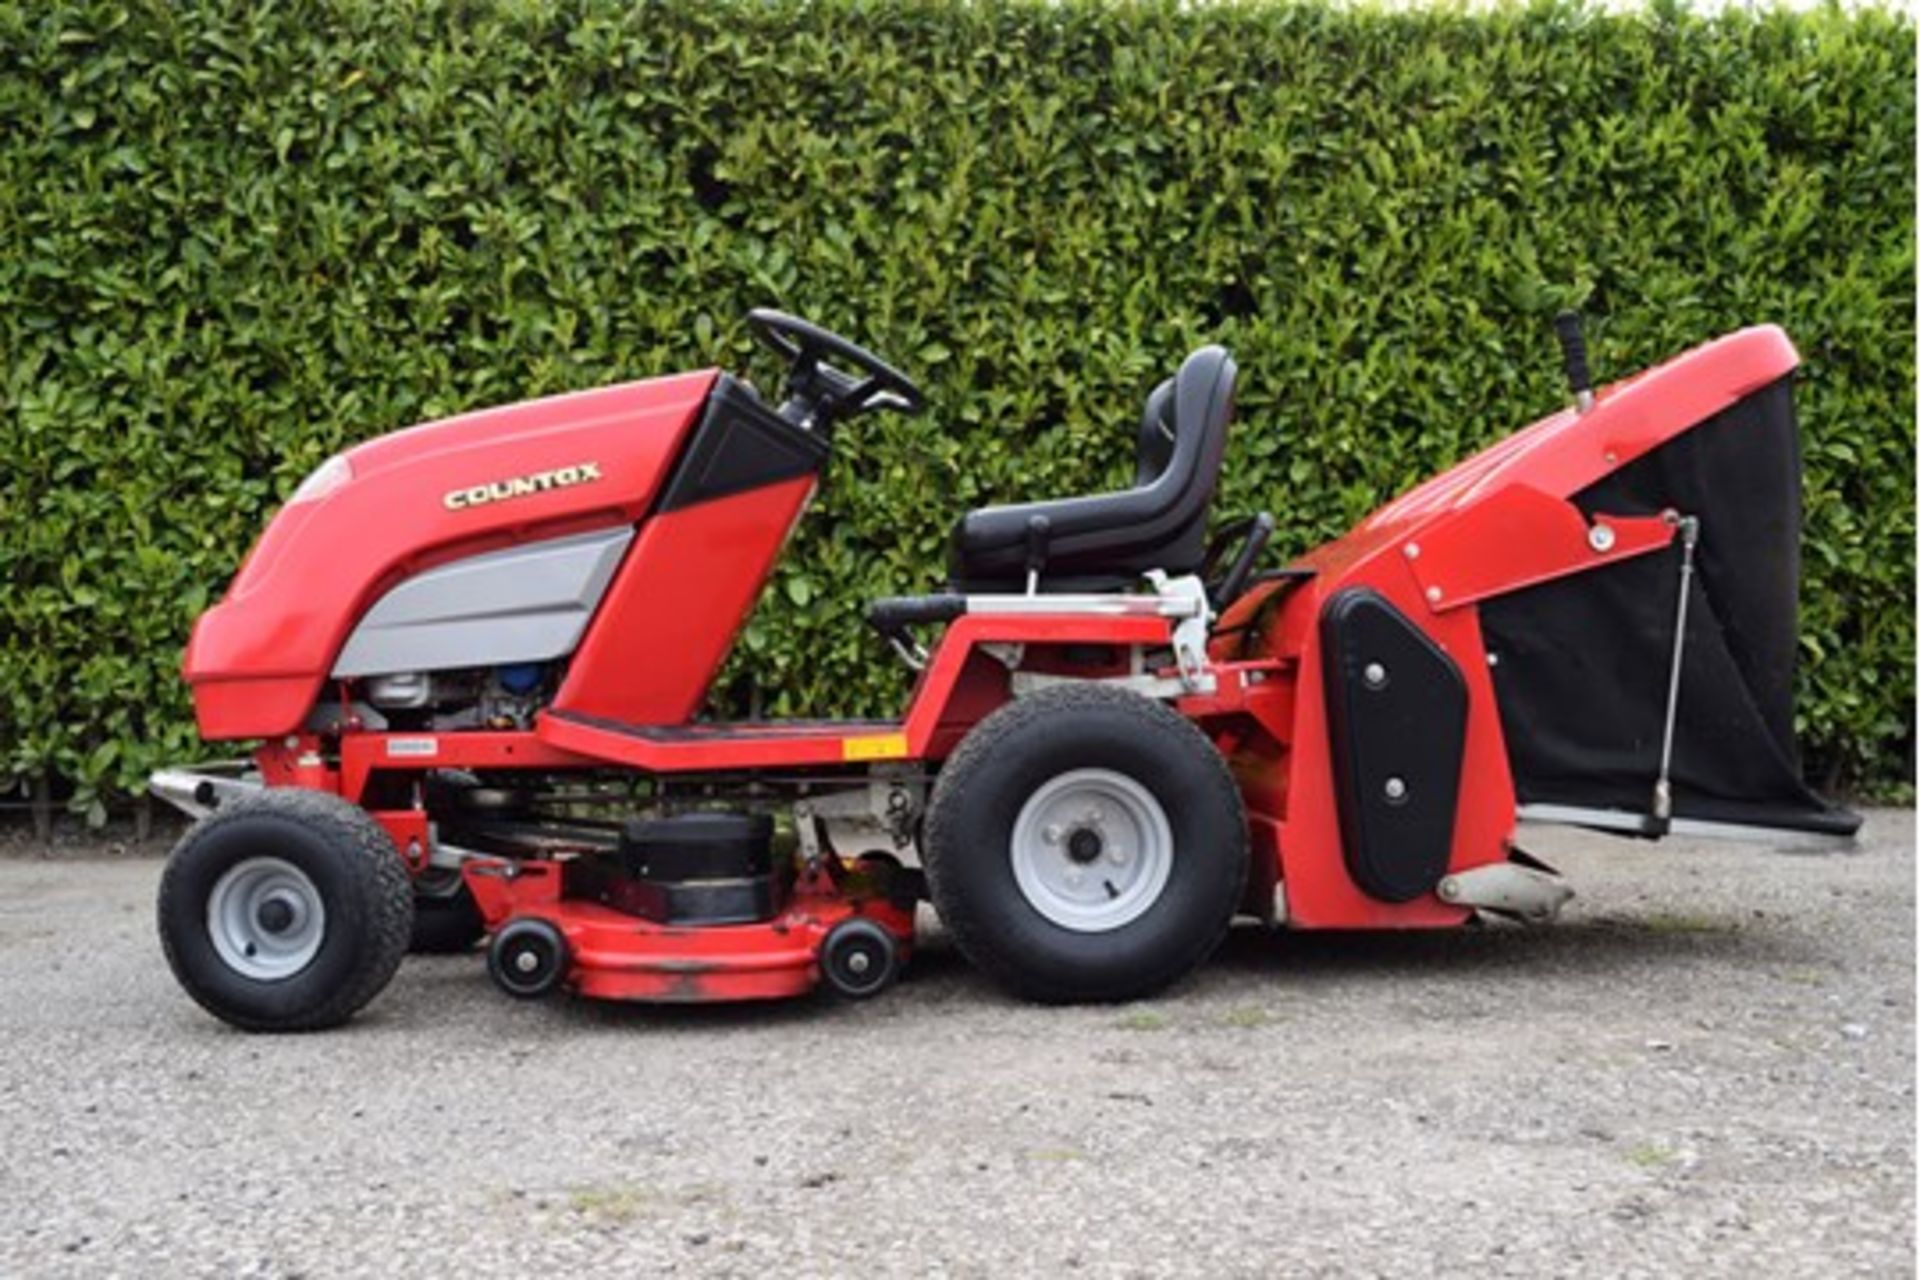 Countax C800H 44" Rear Discharge Garden Tractor With PGC - Image 4 of 7